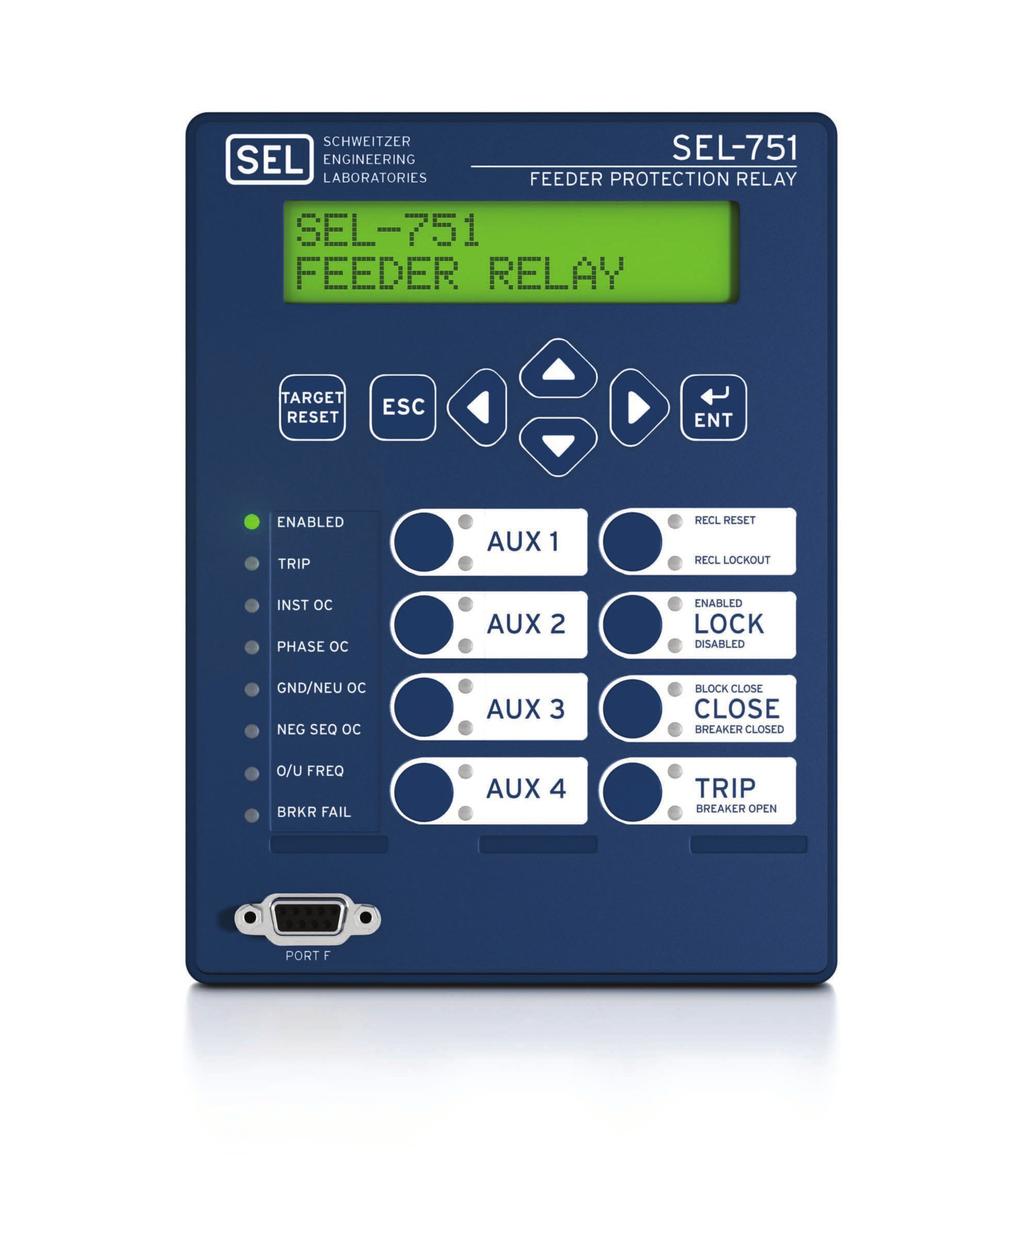 Product Overview The 2-line by 16-character (2 16) LCD provides navigation, relay control, data, and diagnostics via default messages or up to 32 customizable display messages.